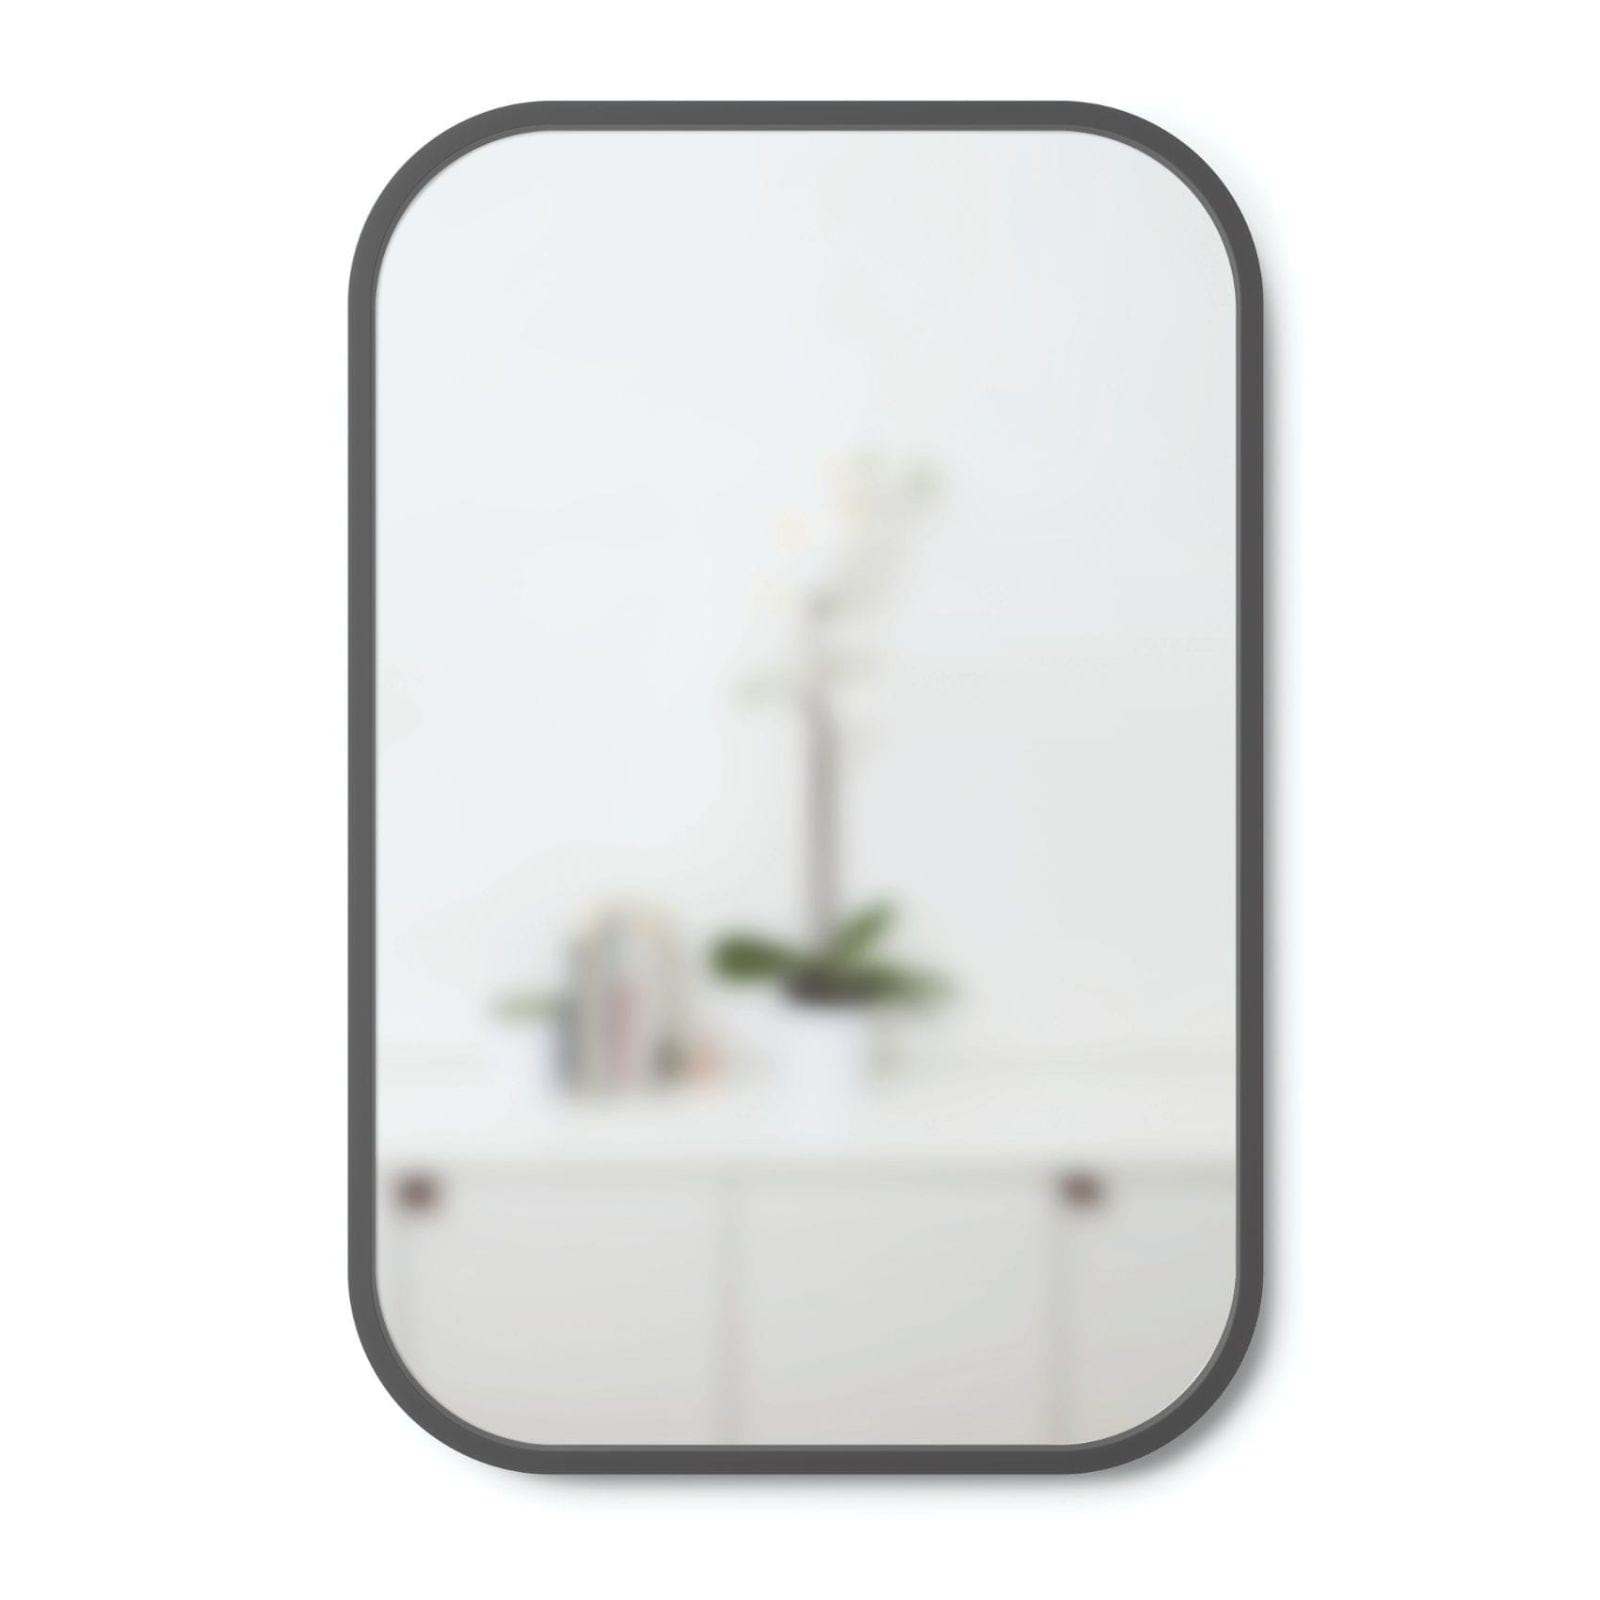 umbra hub wall mirror with rubber frame lowes